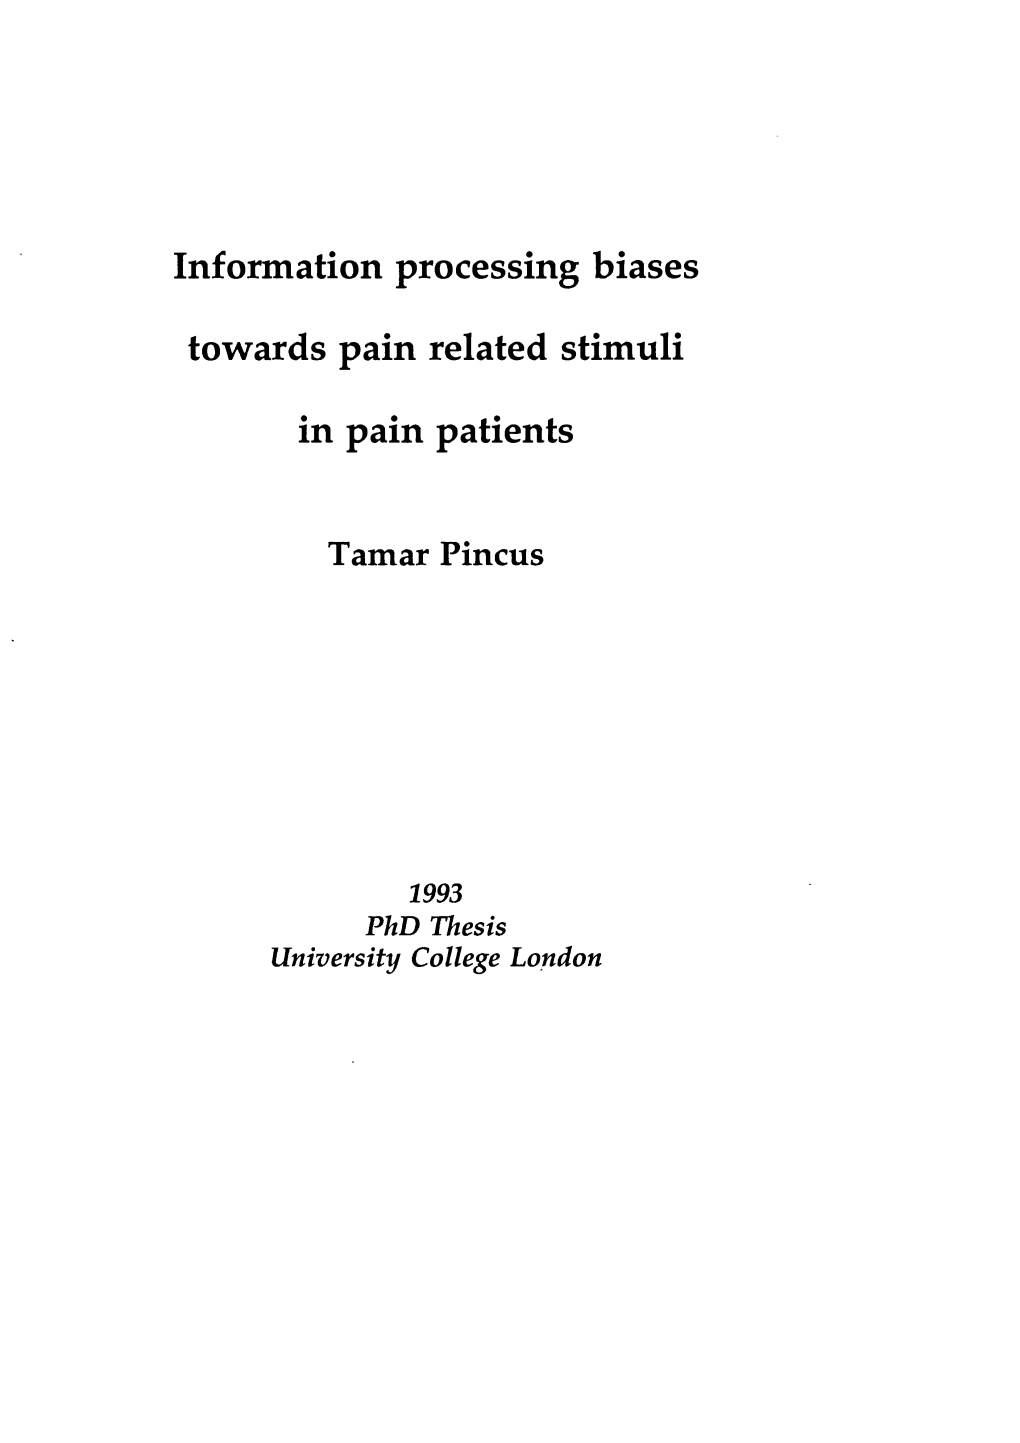 Information Processing Biases Towards Pain Related Stimuli in Pain Patients